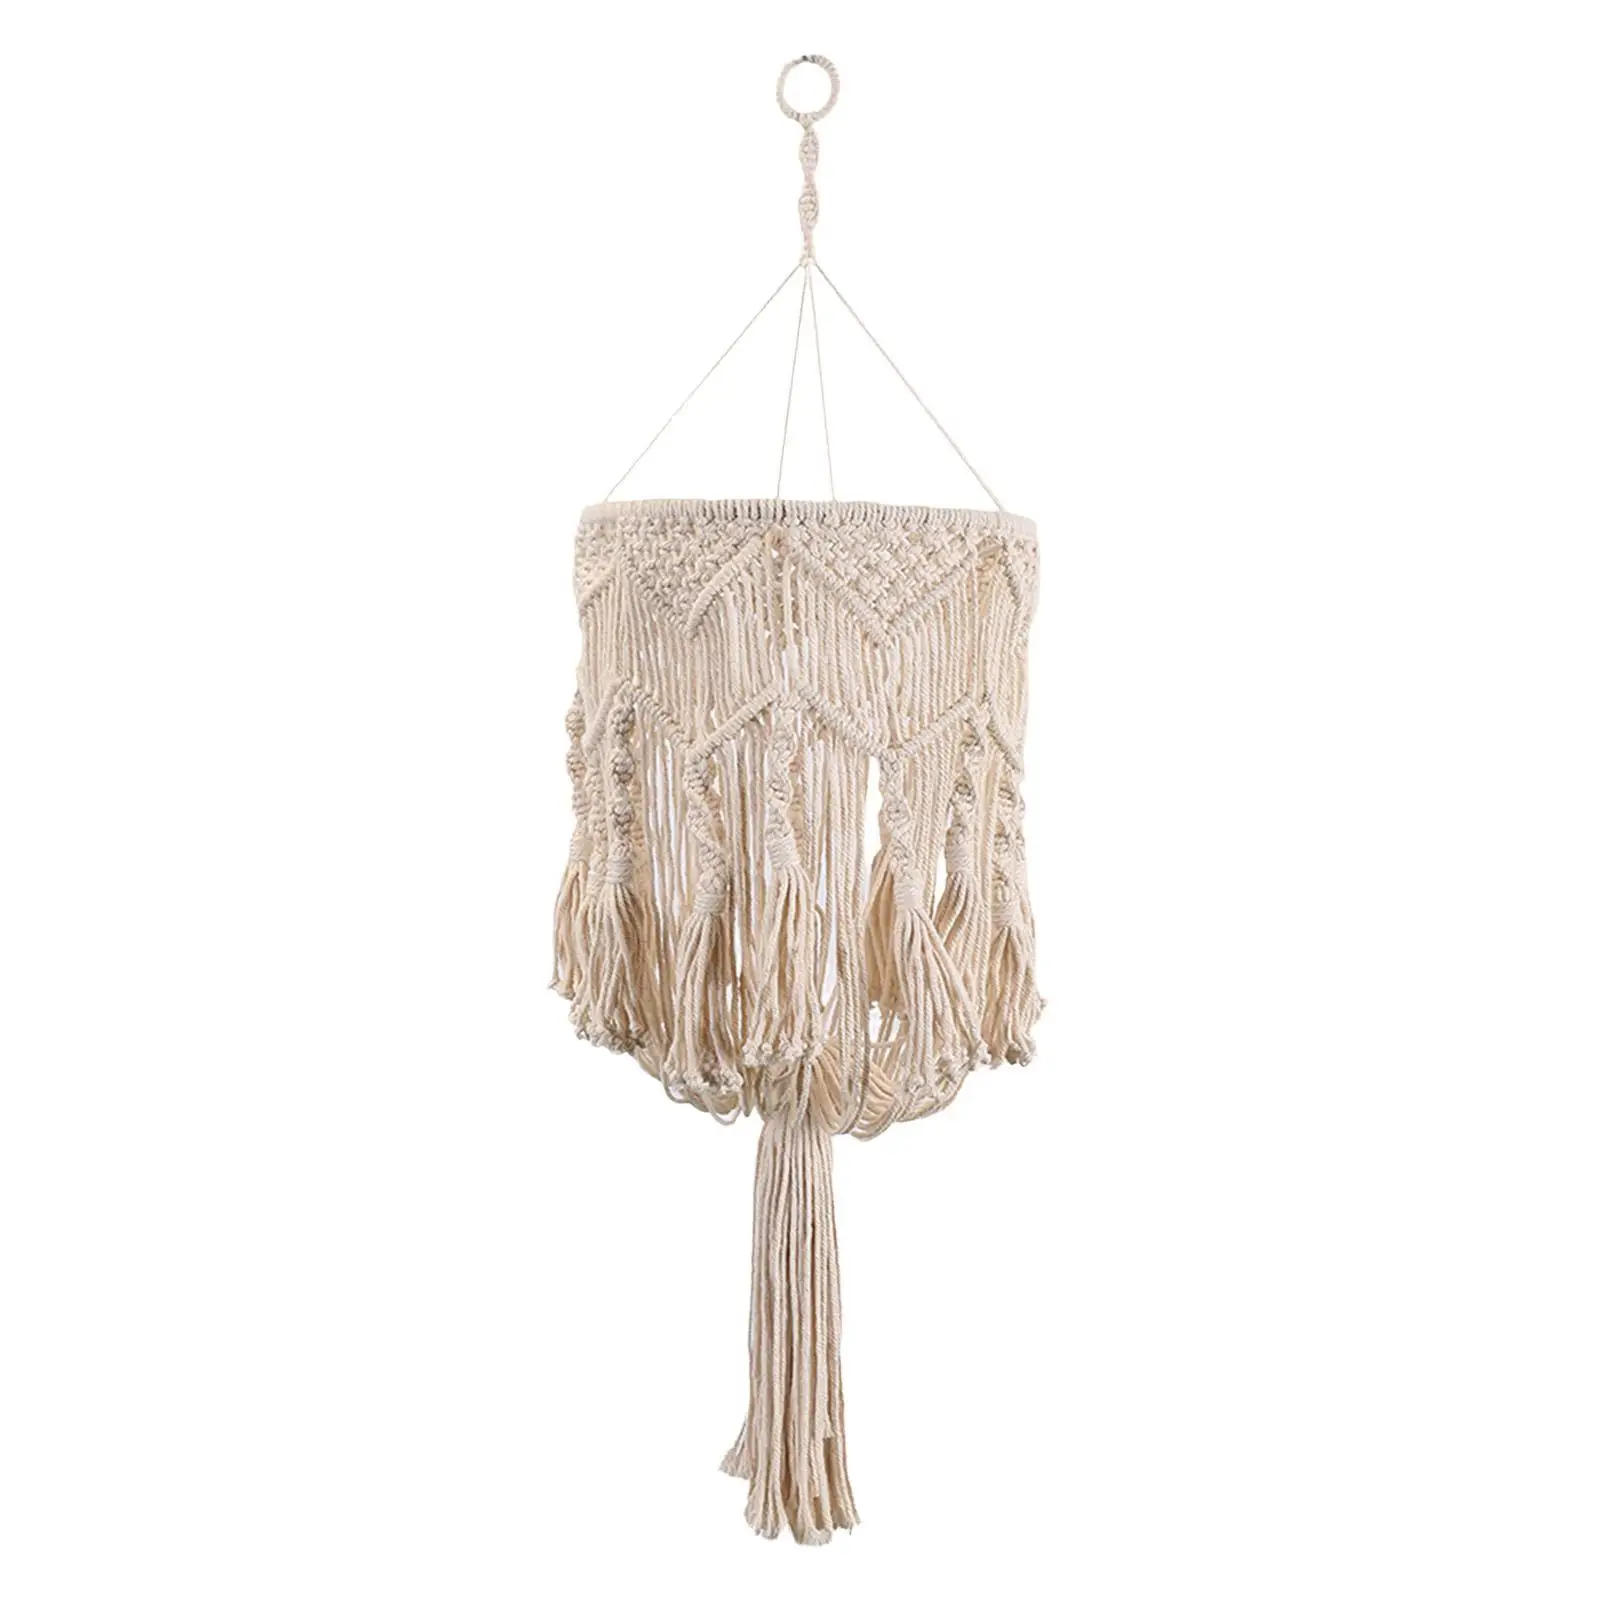 Macrame Tassel Lamp Shade Ceiling Light Cover Boho Handmade Woven Hanging Lampshade for Nursery Party Office Bedroom Decoration